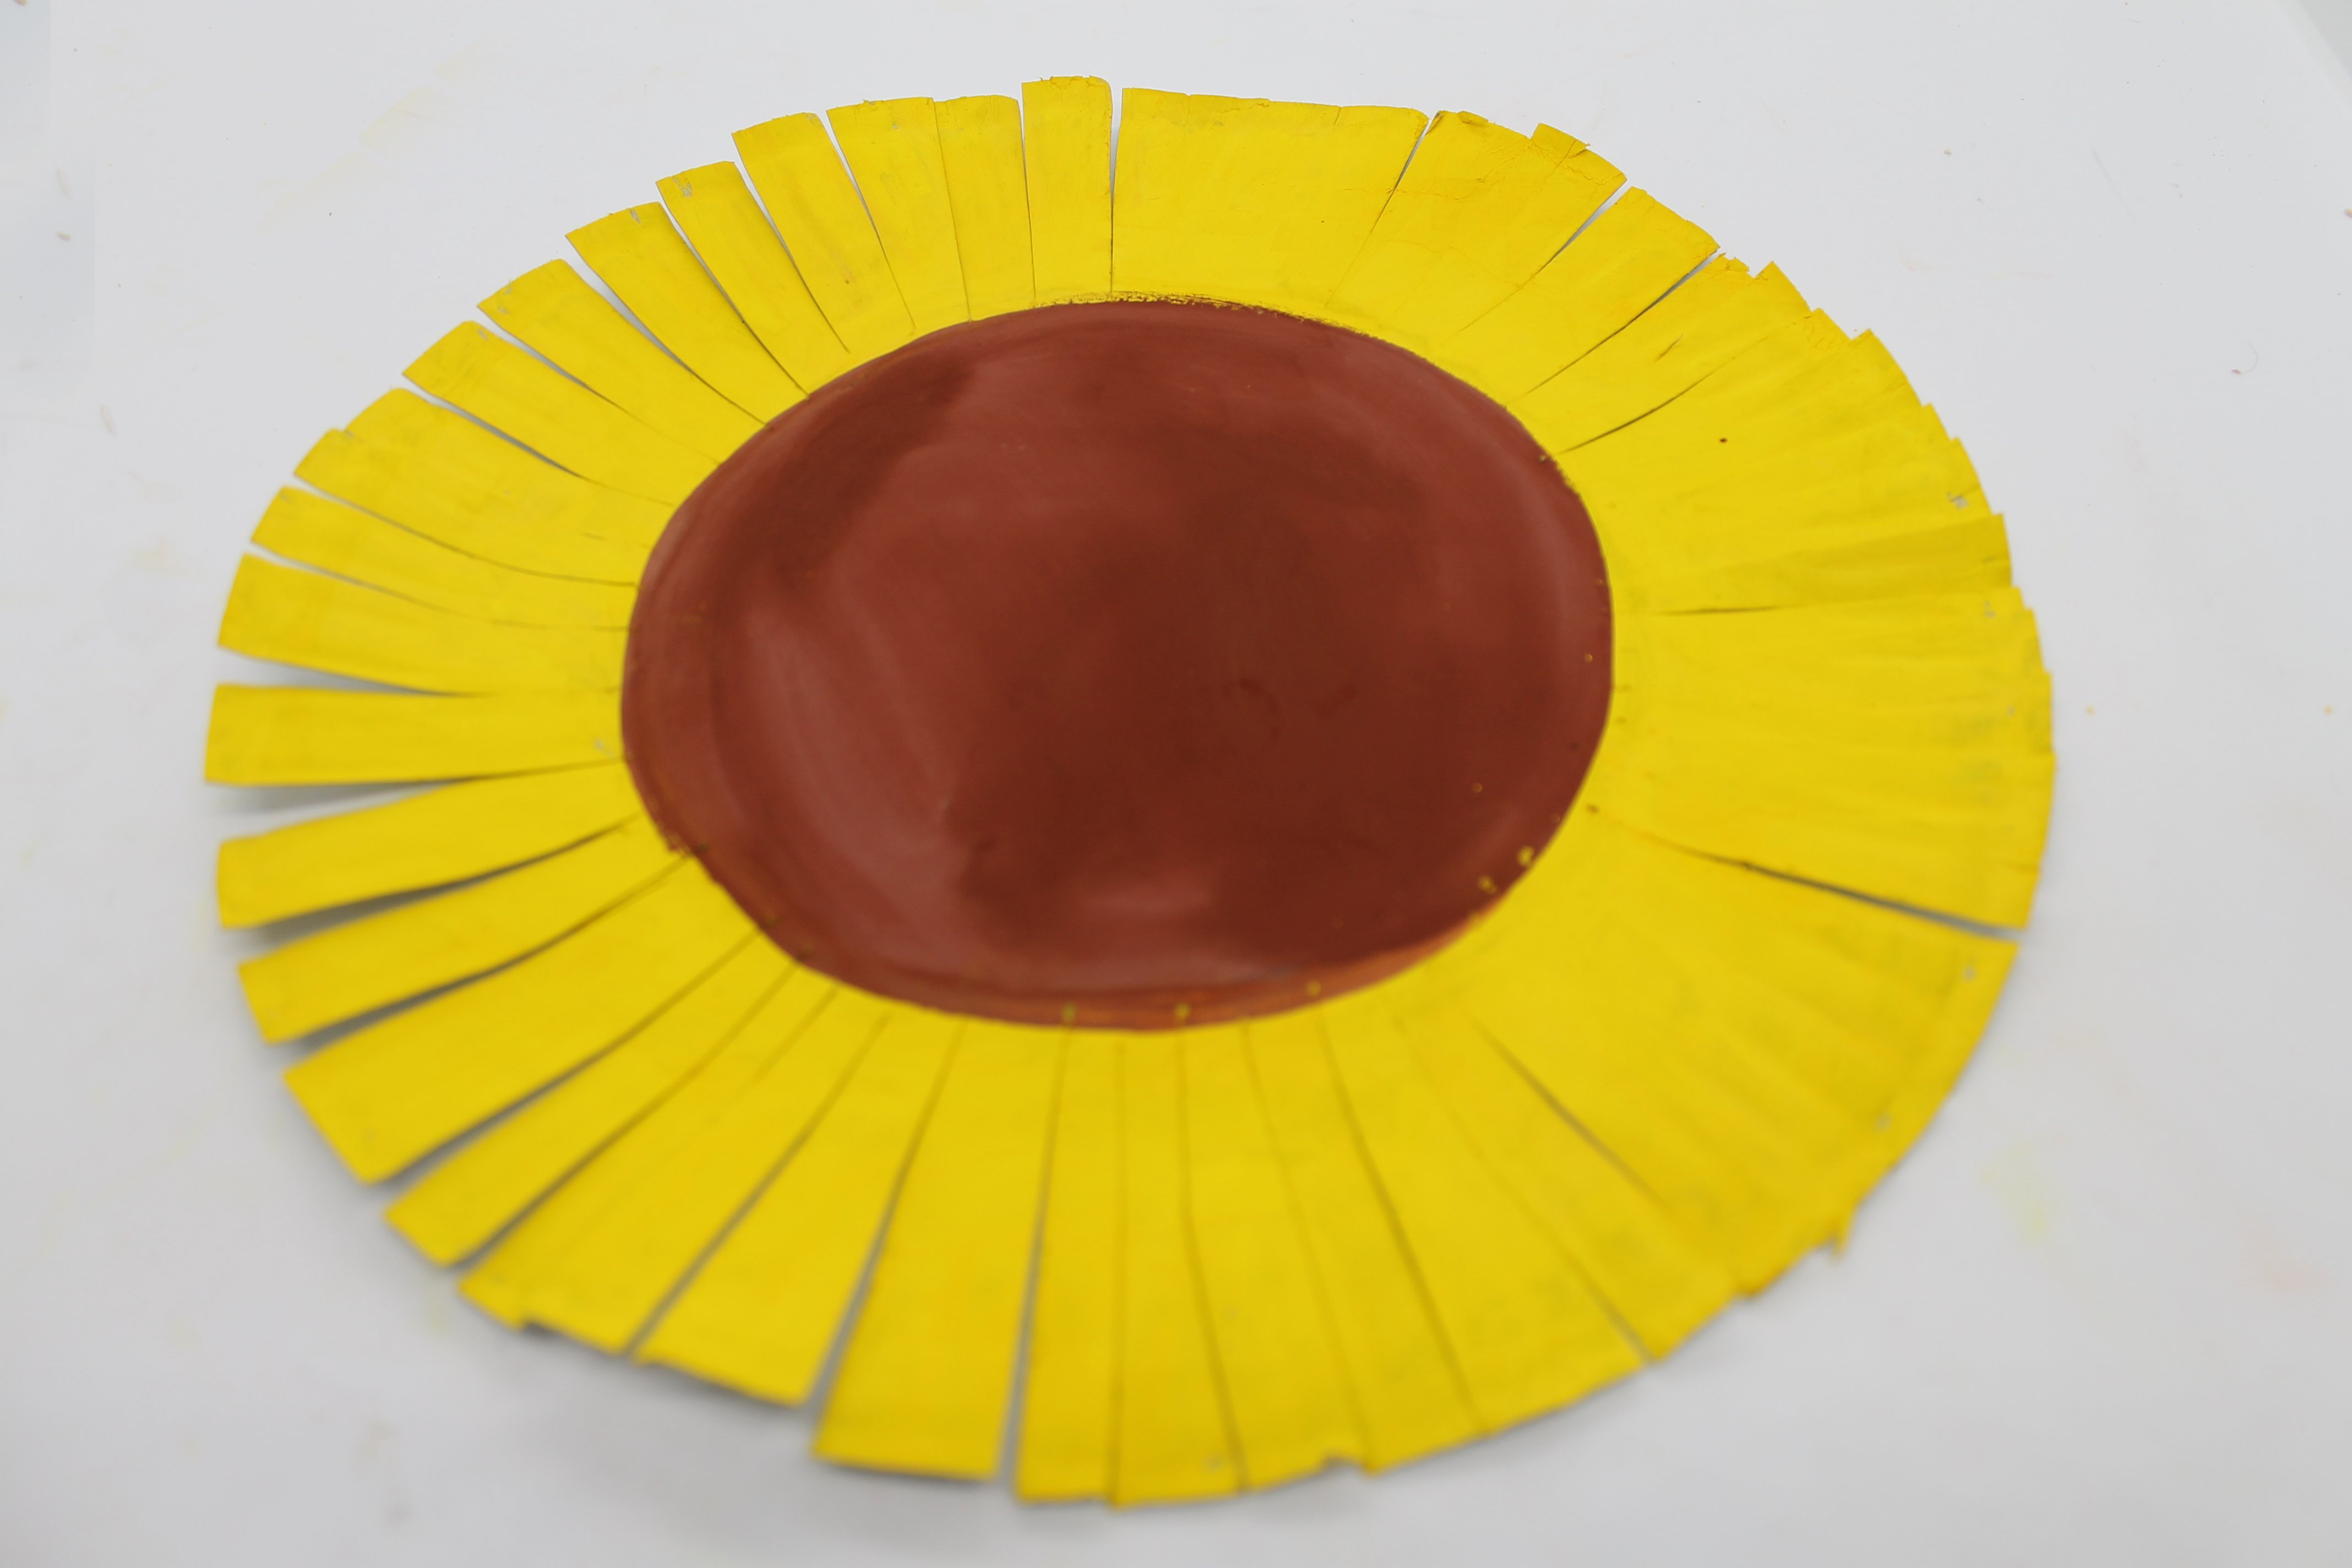 How to Make a Paper Plate Sunflower - Step 8